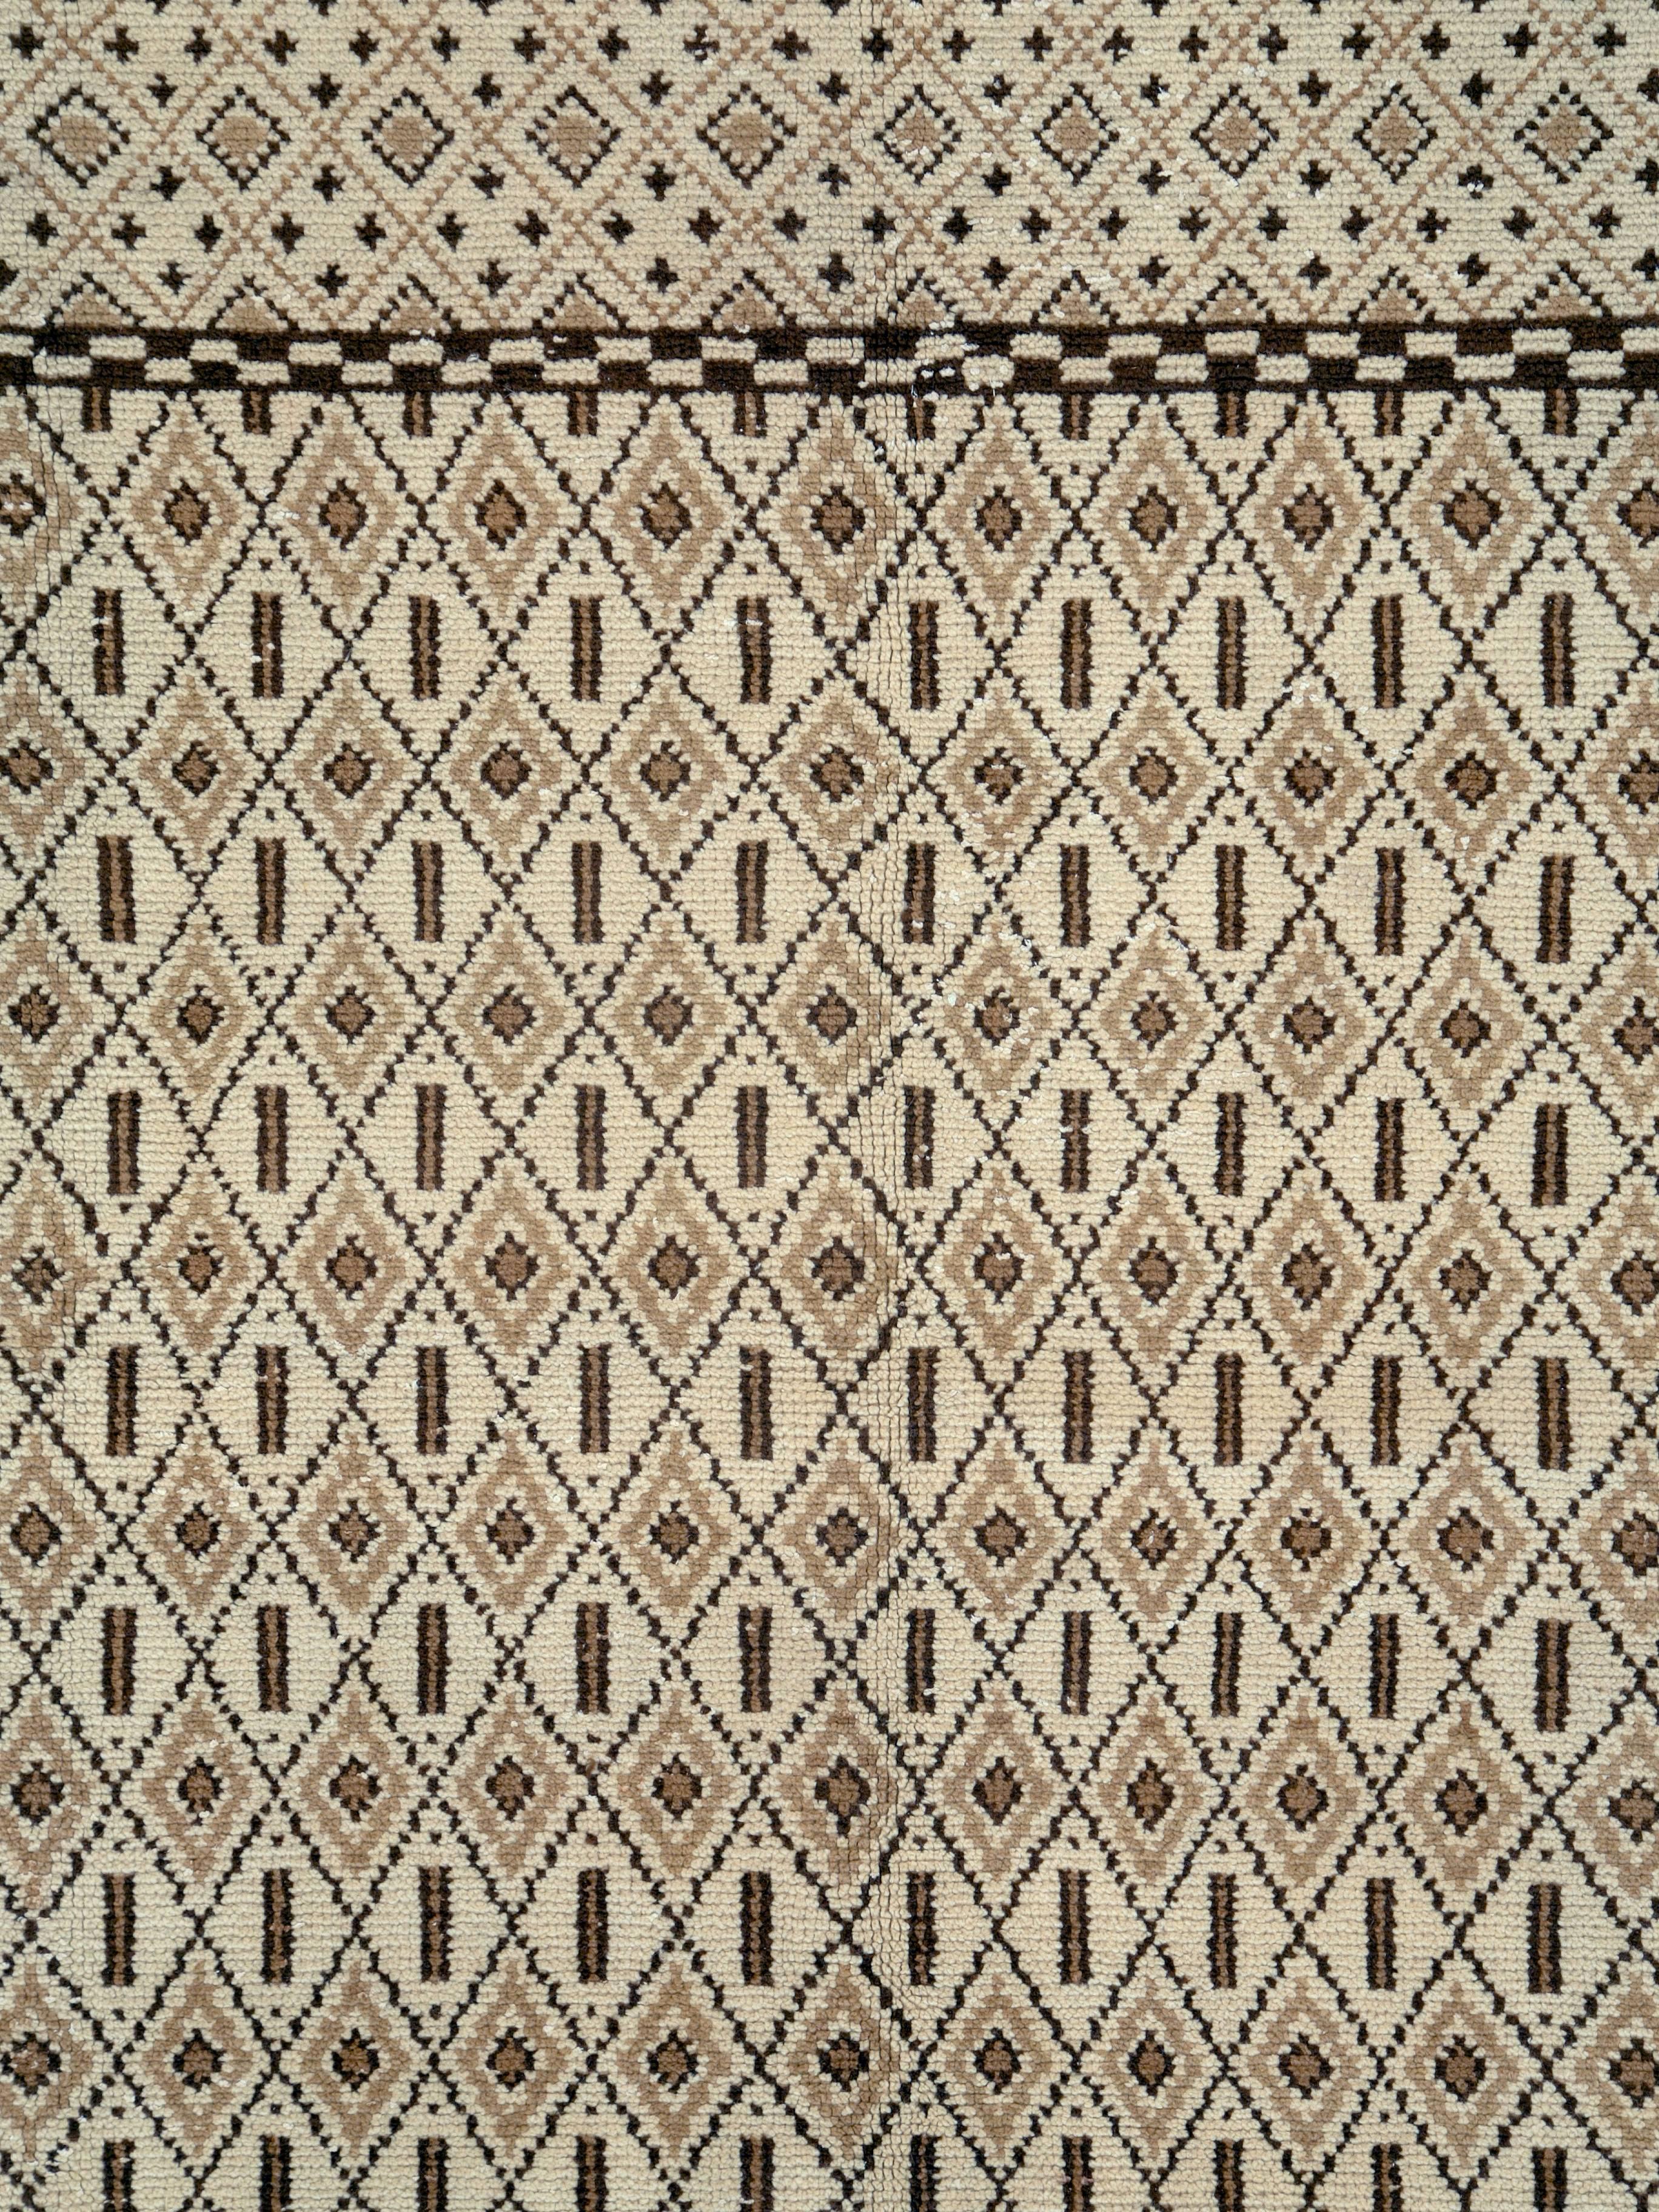 A modern Moroccan rug from the 21st century.